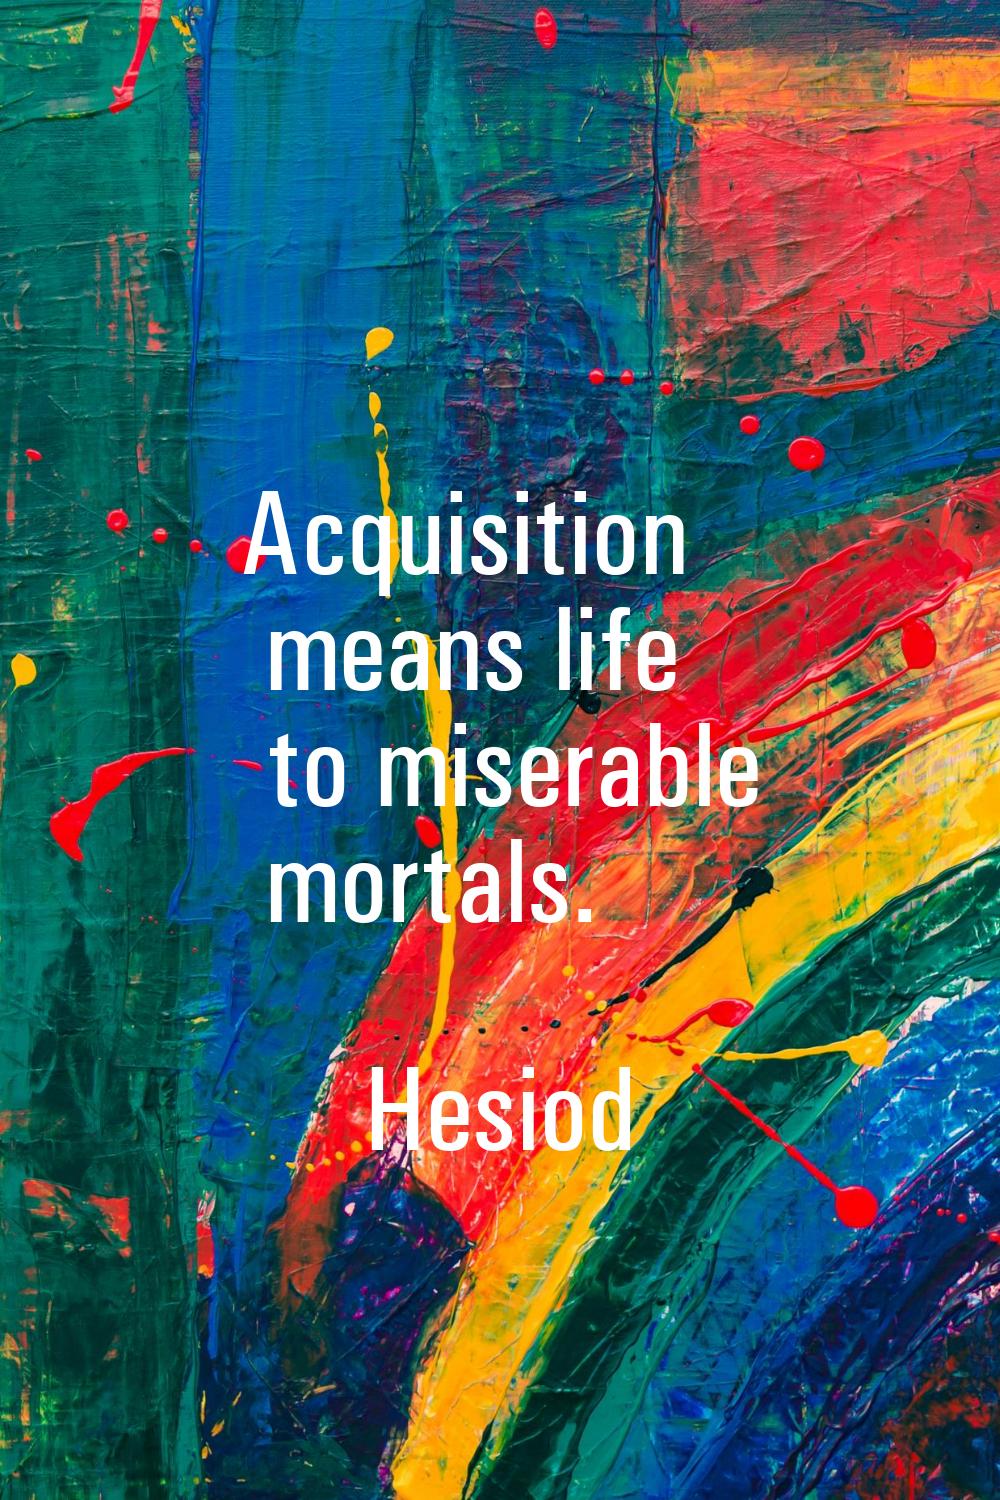 Acquisition means life to miserable mortals.